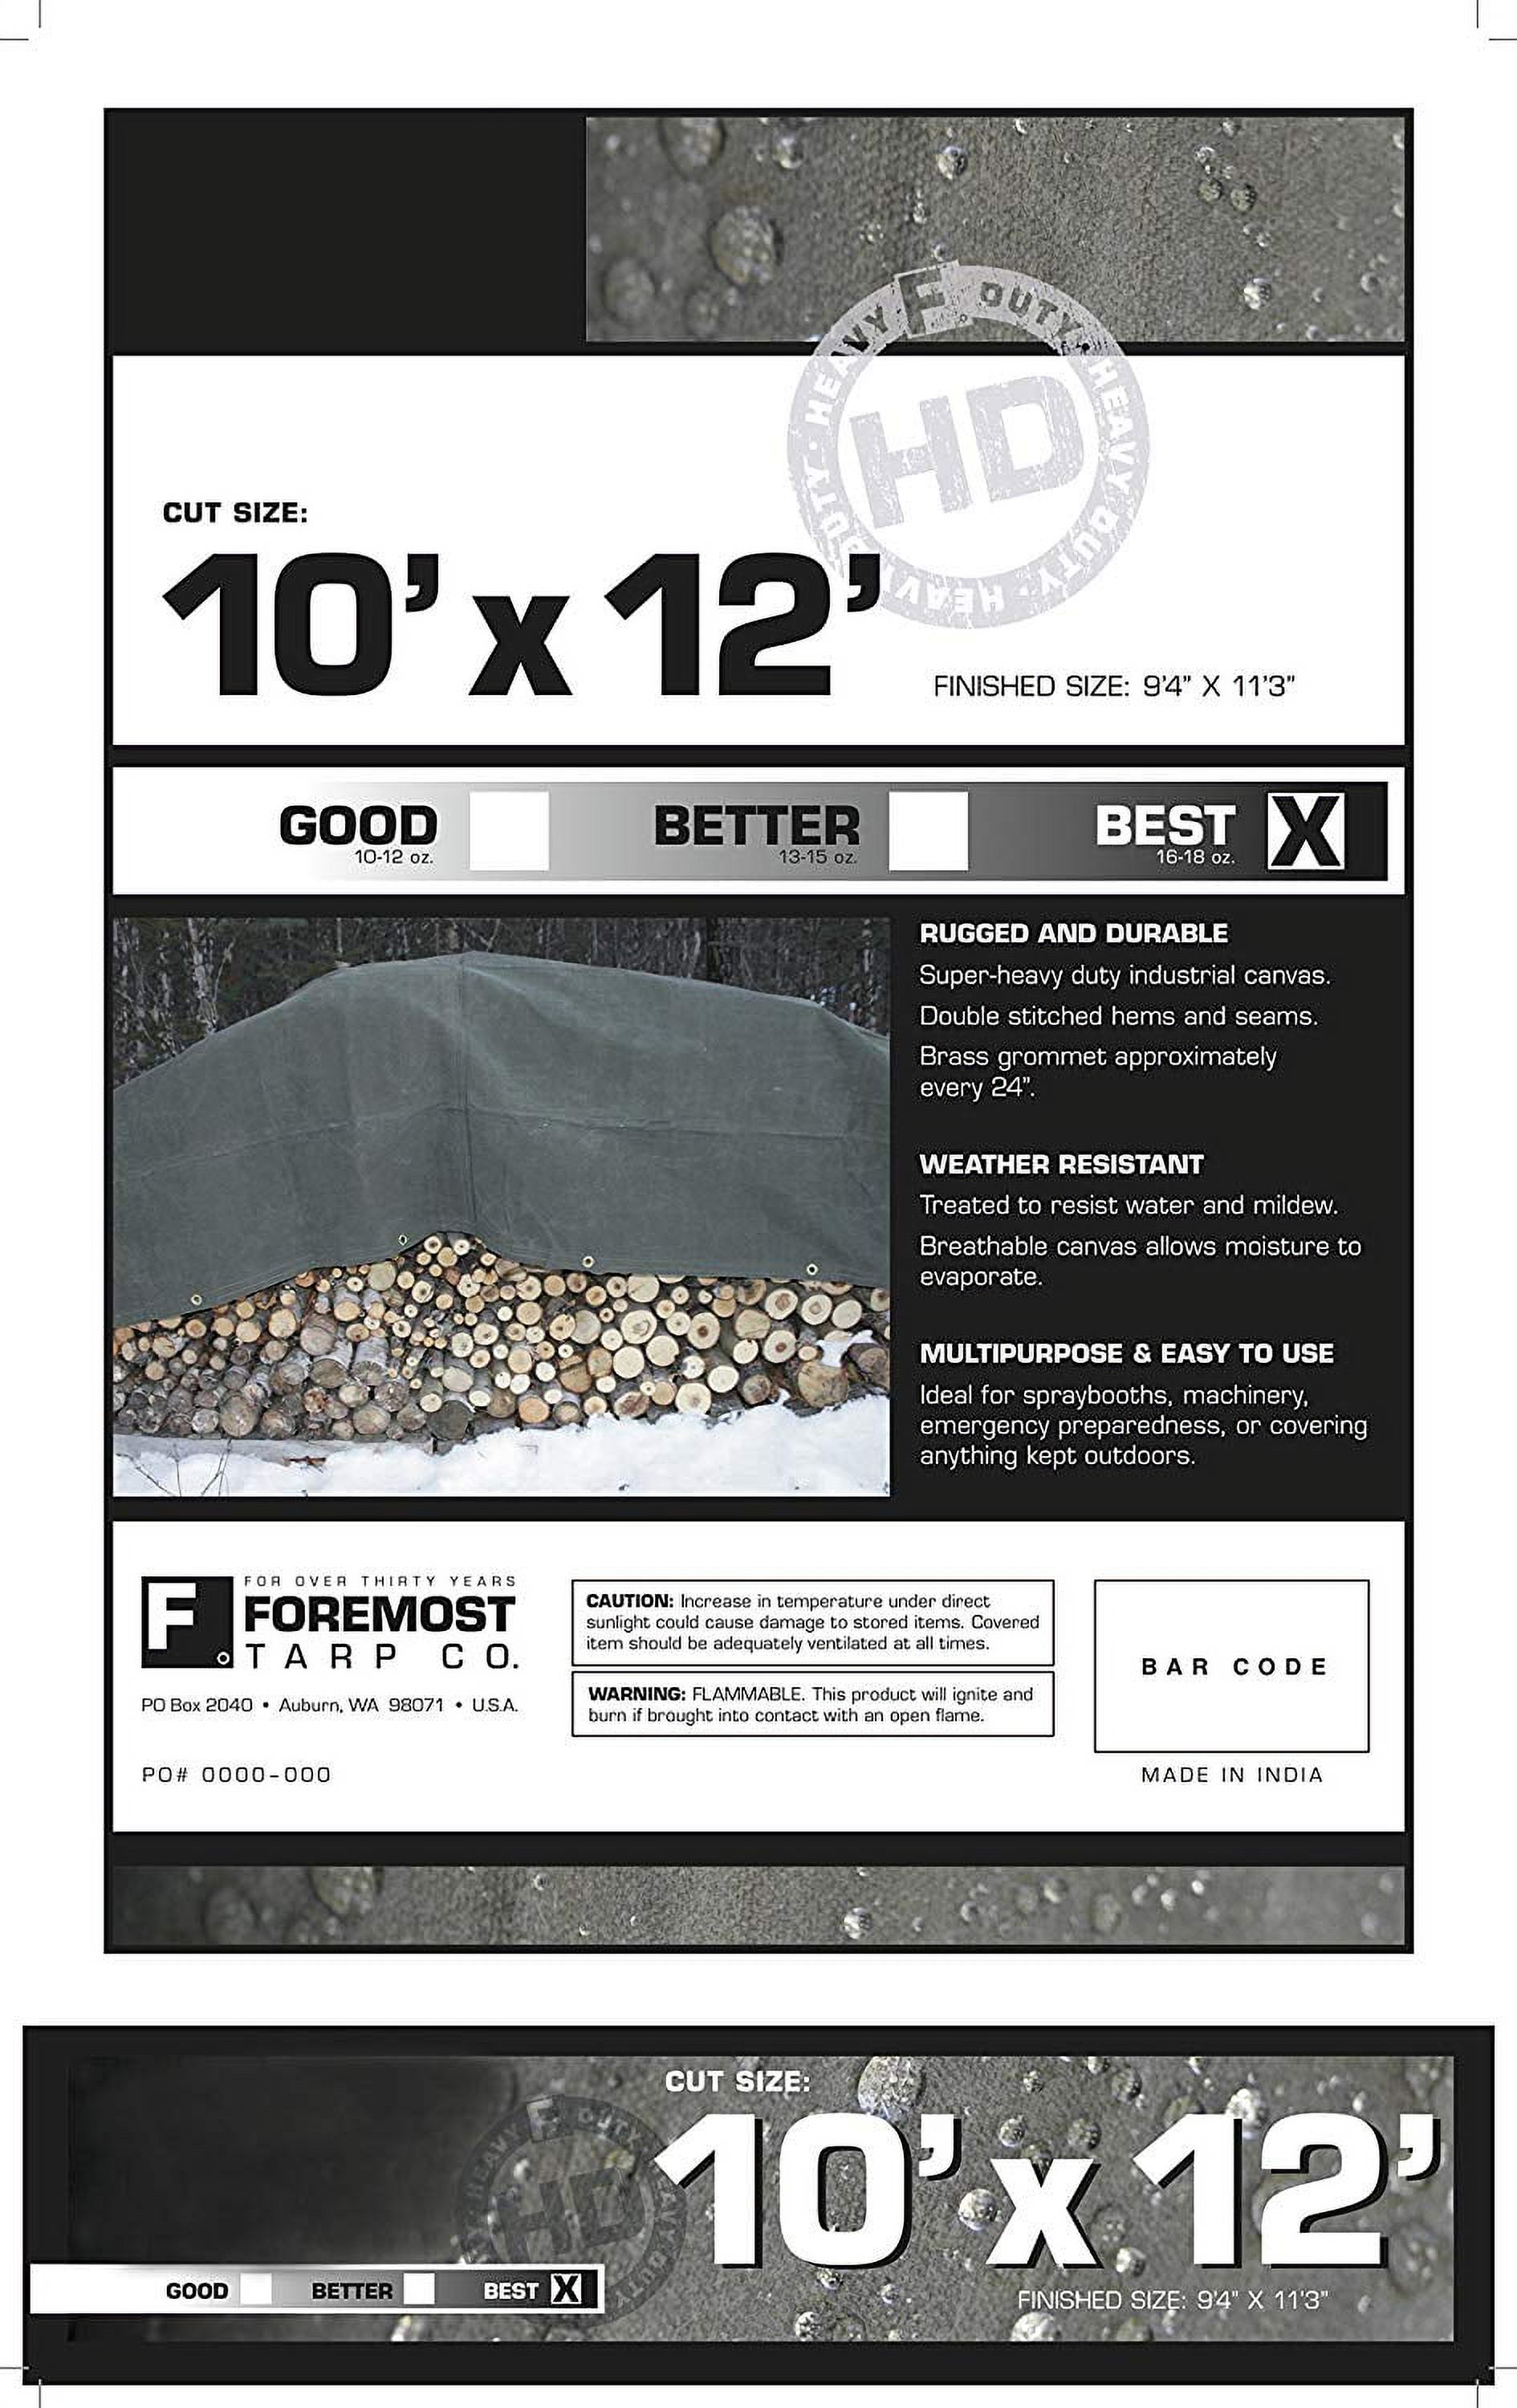 Dry Top 12 ft. W x 16 ft. L Heavy Duty Canvas Tarp Olive - image 3 of 4